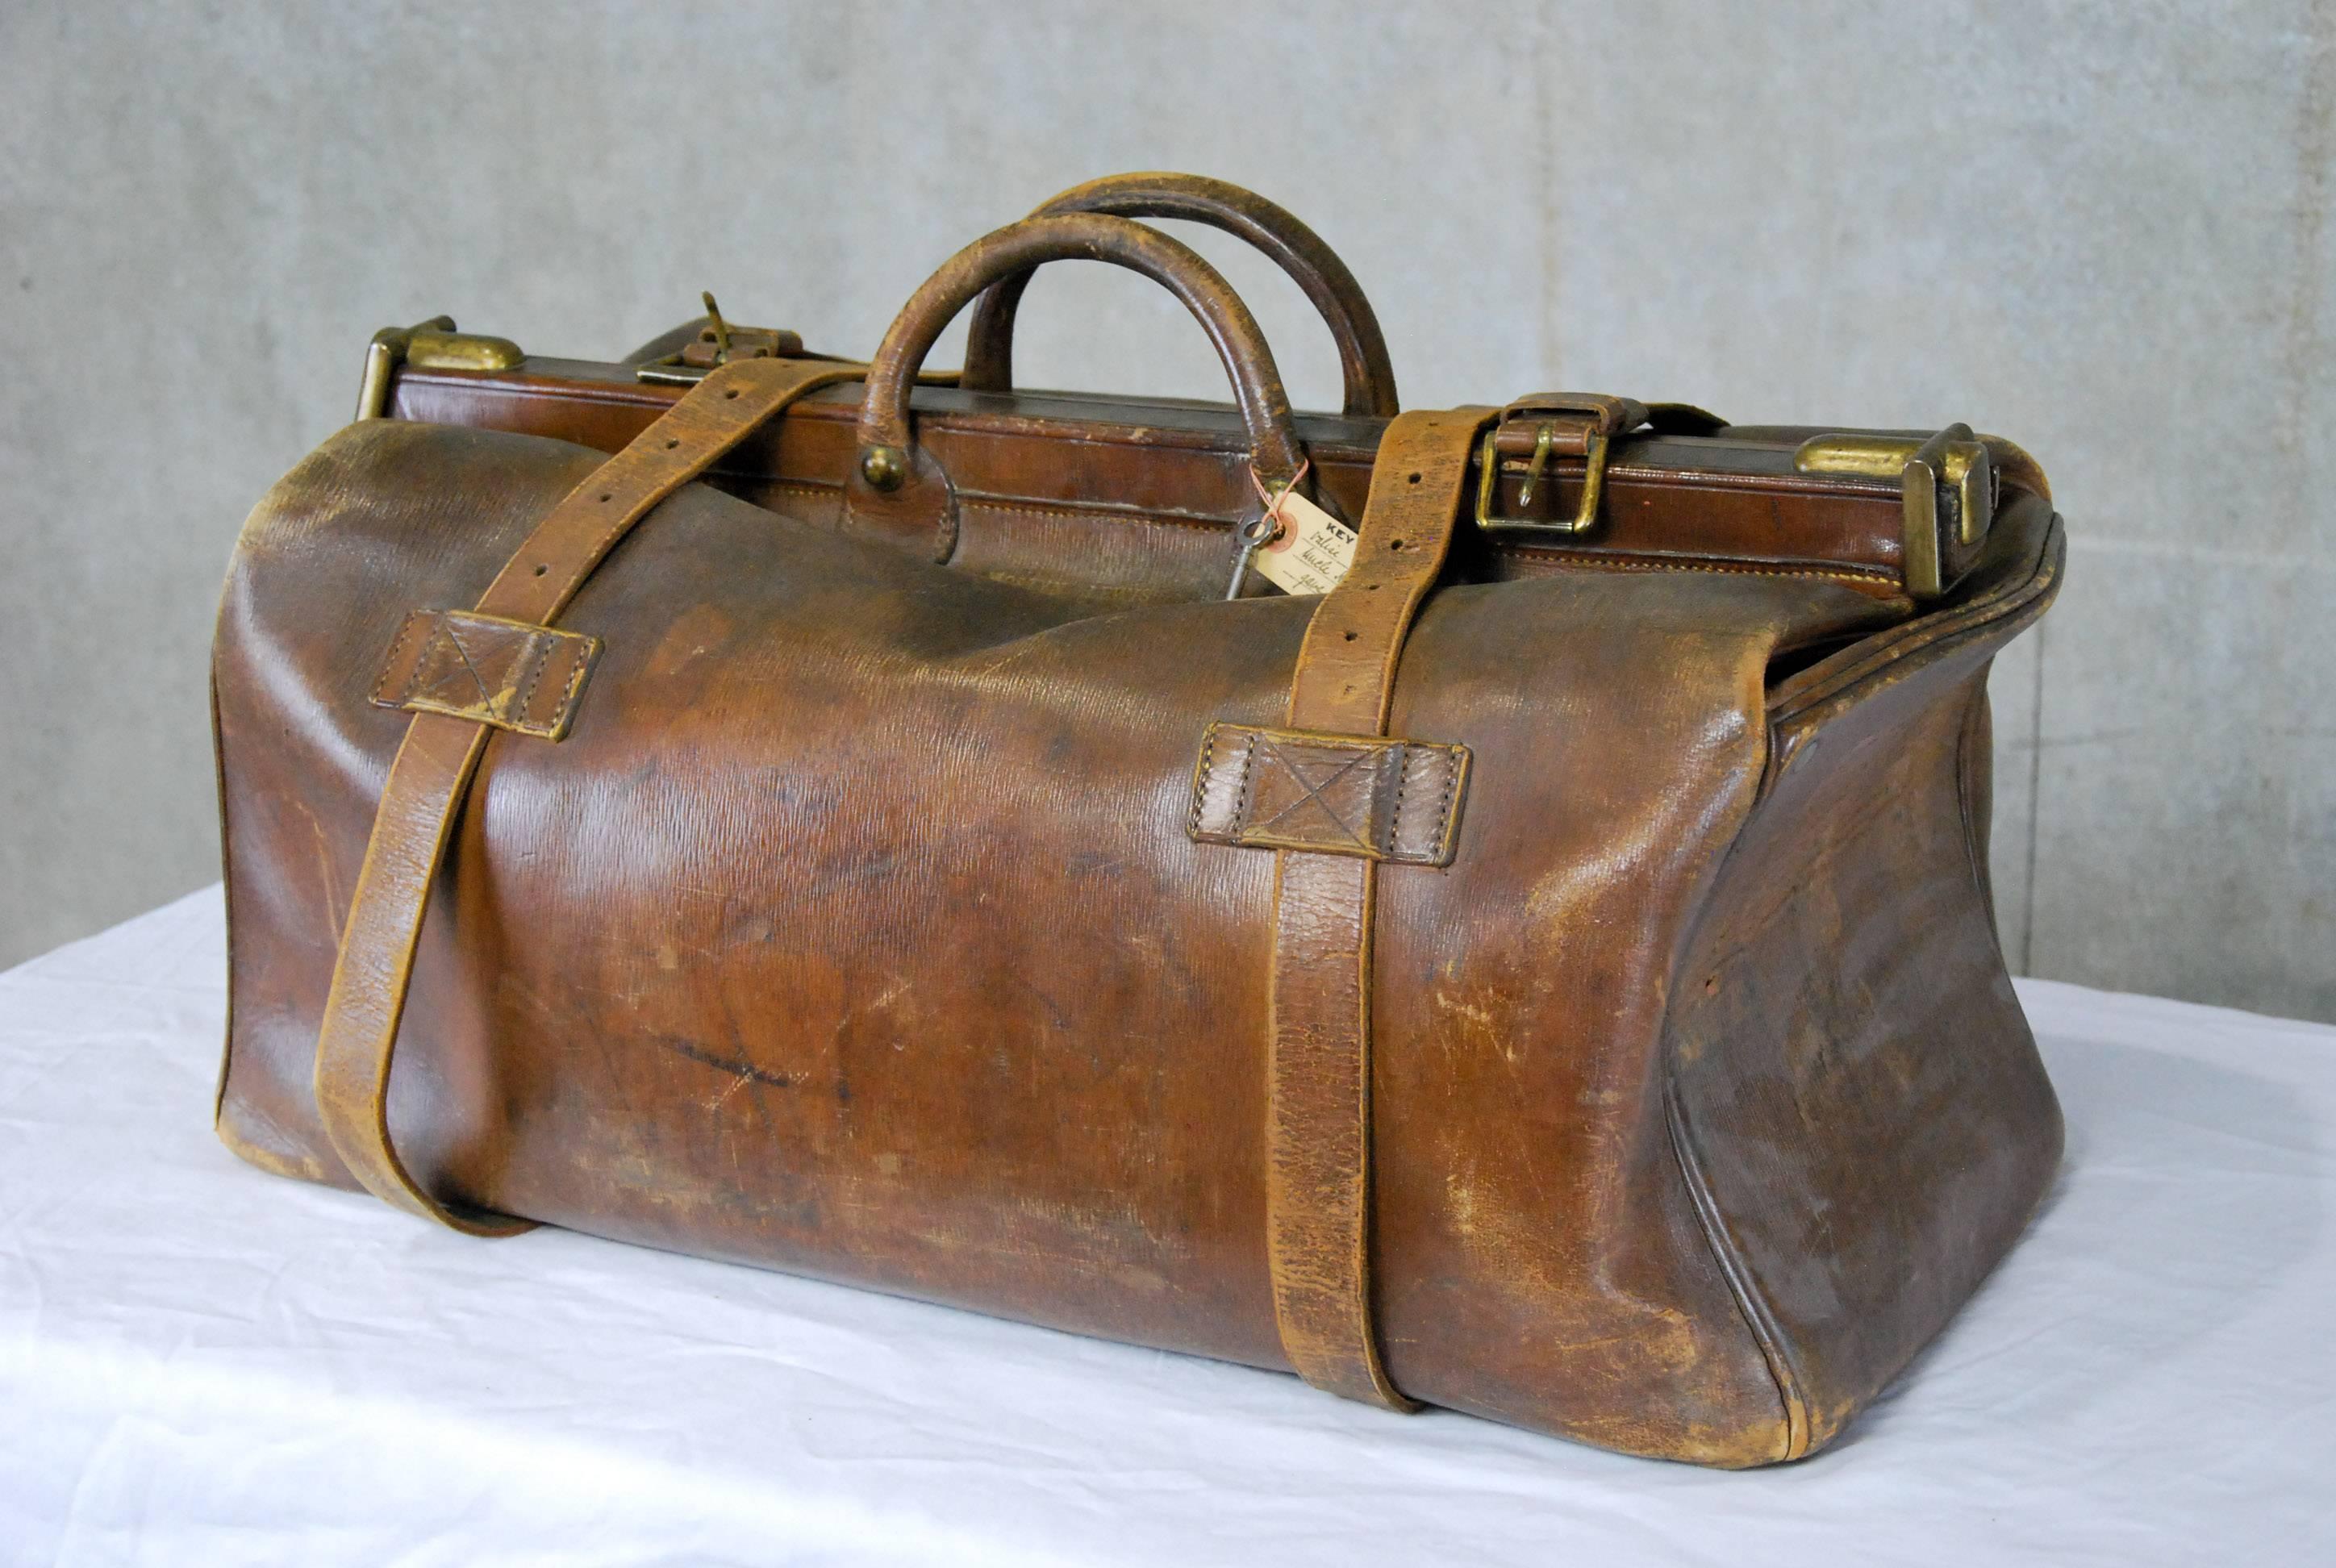 Leather bag with working key, brass hilites and great condition. Purchased from a prominent family in Montreal.

The Army and Navy Co-Operative Society Ltd was formed in 1871 by a group of British army and navy officers. It was their intention to